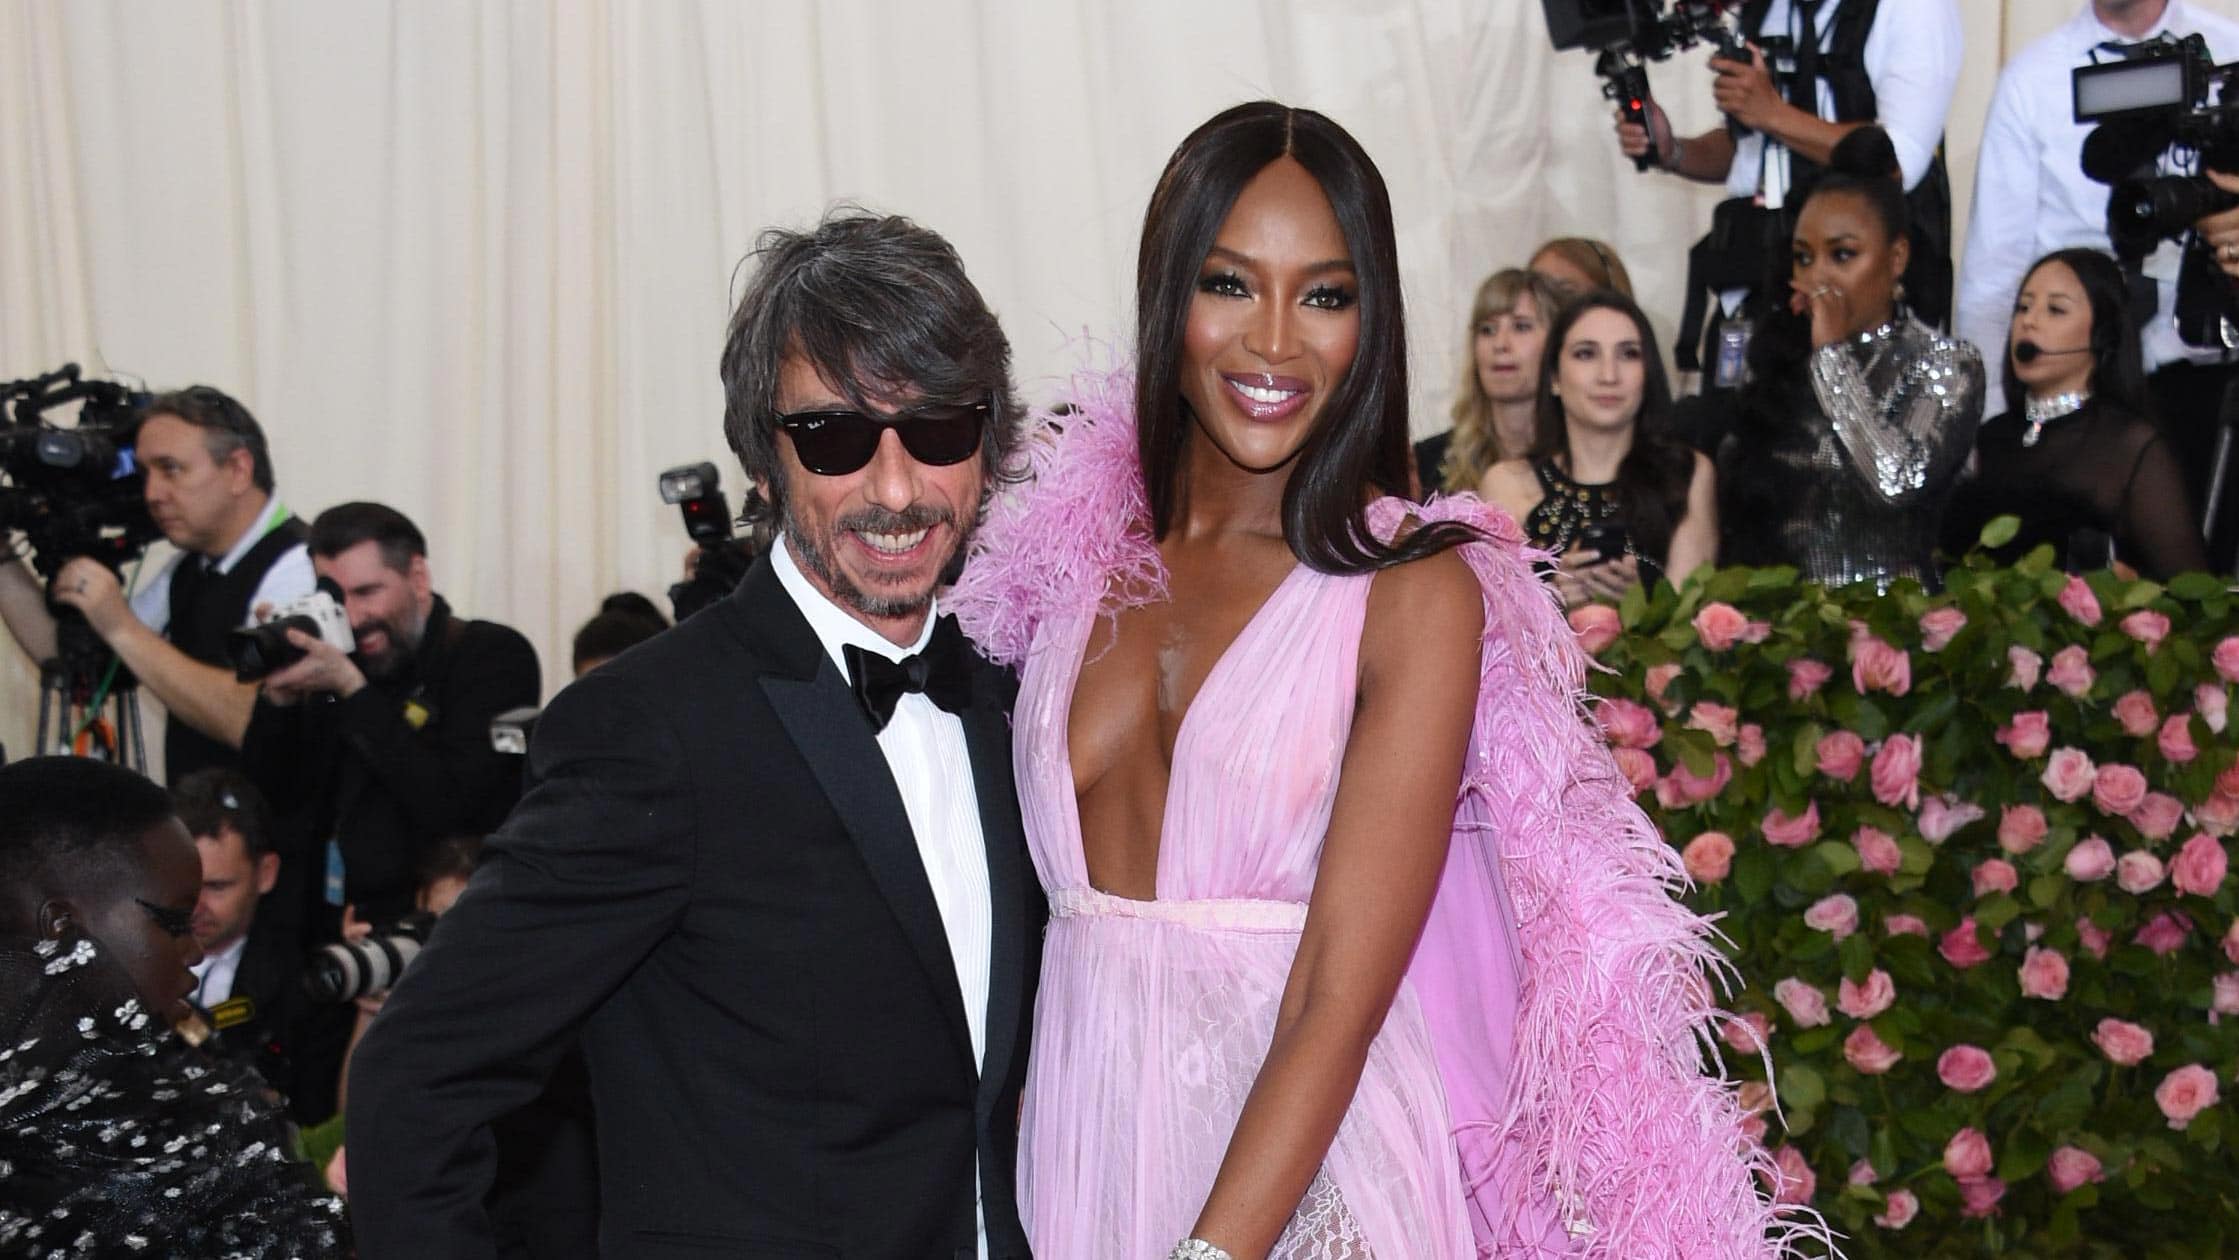 Icons before Instagram: Naomi Campbell celebrates three decades reigning runways